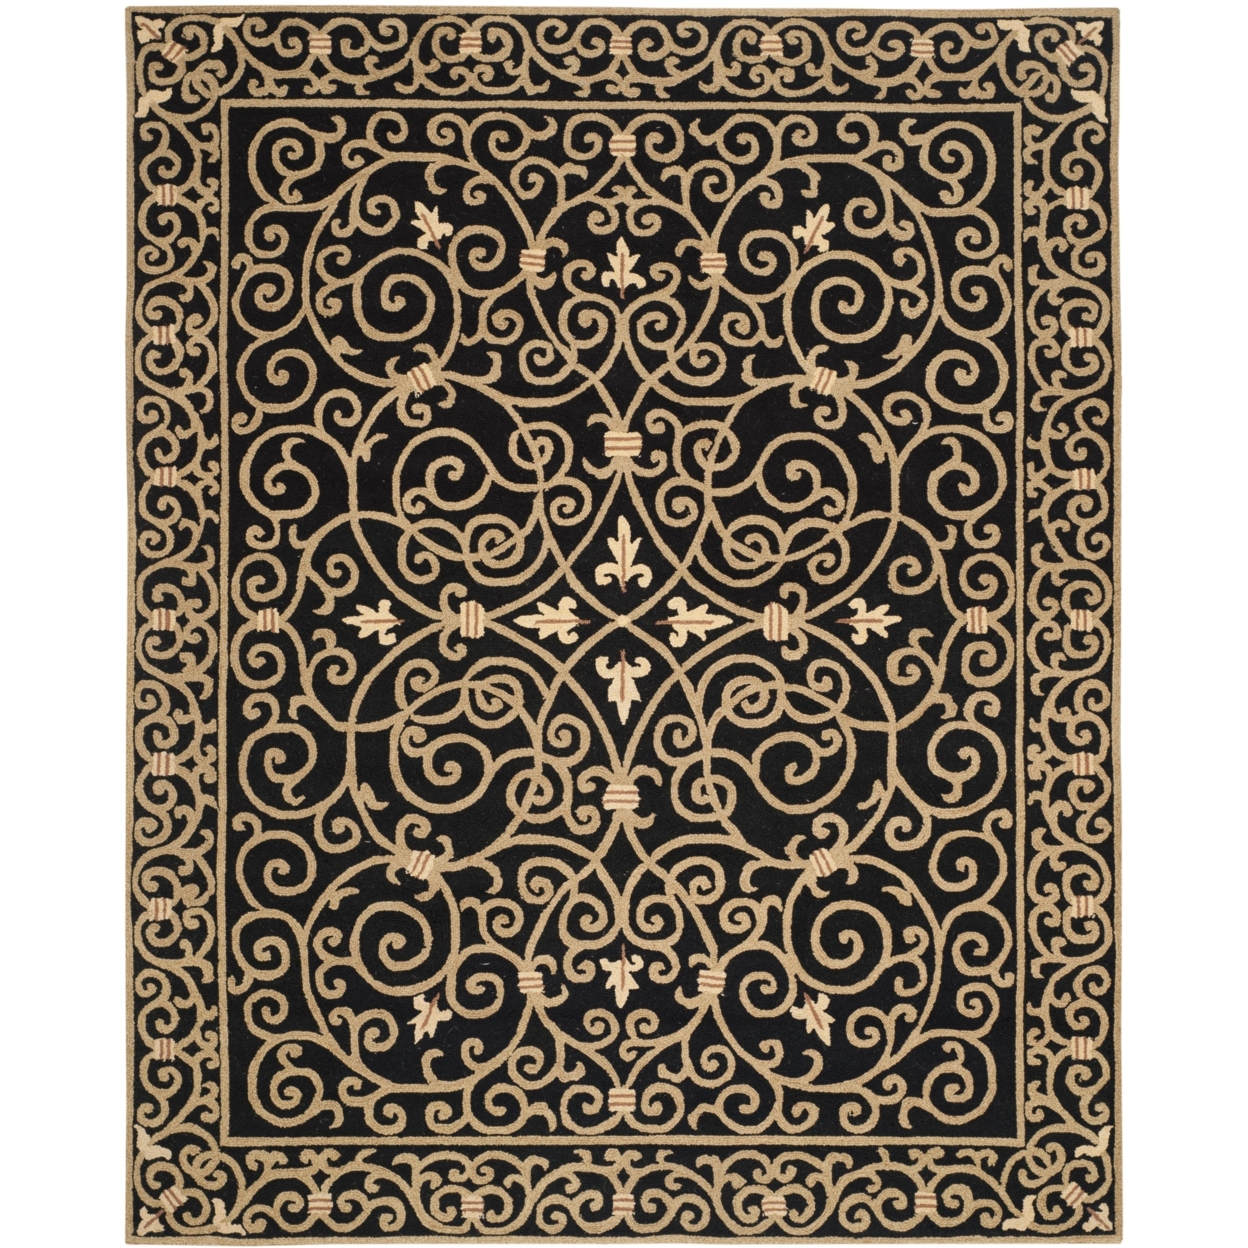 SAFAVIEH Chelsea Collection HK11A Hand-hooked Black Rug - 7' 9 X 9' 9